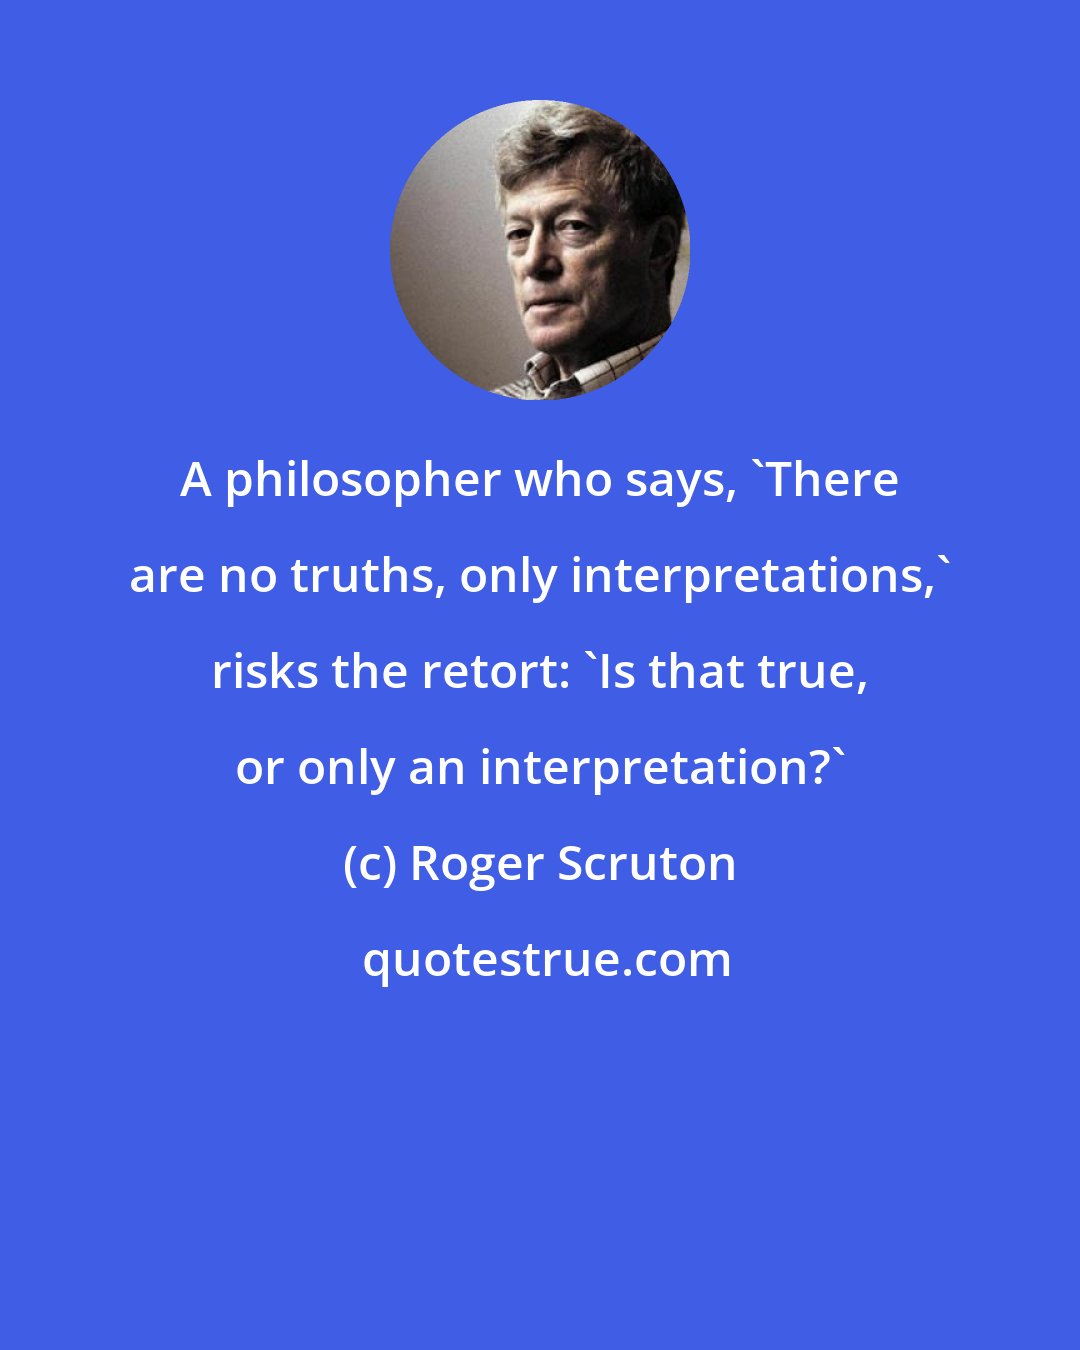 Roger Scruton: A philosopher who says, 'There are no truths, only interpretations,' risks the retort: 'Is that true, or only an interpretation?'